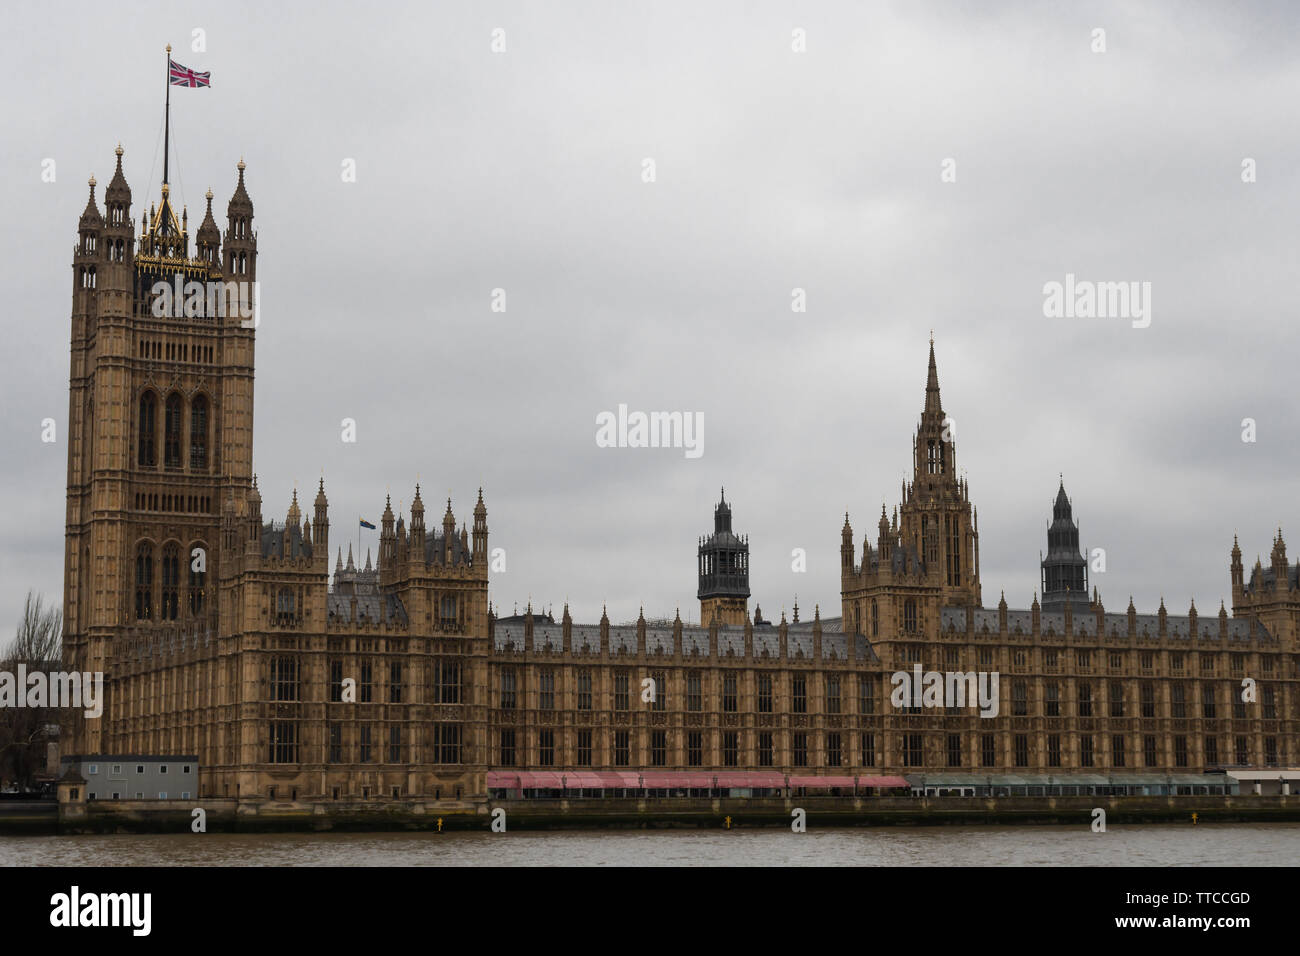 London - Palace of Westminster - March 20, 2019 Stock Photo